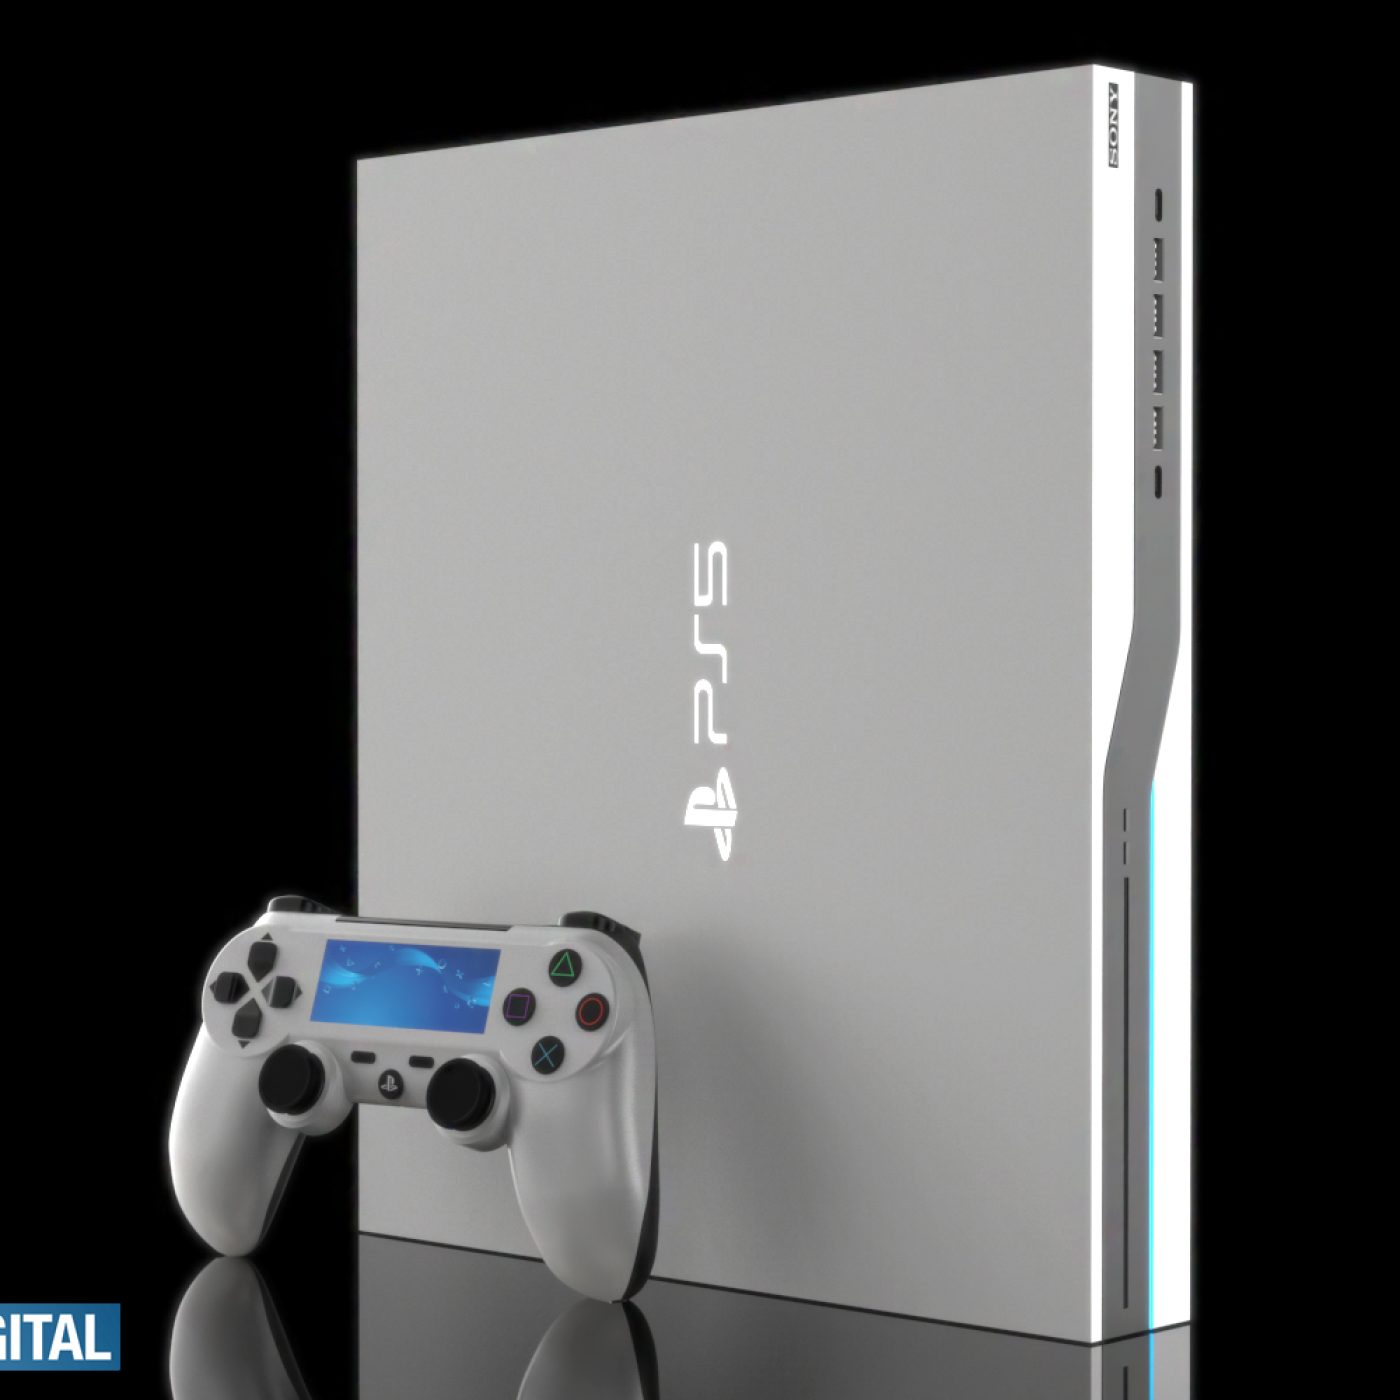 Black and white style: Concept Creator designer showed concept renders of  the Sony PlayStation 5 Pro game console